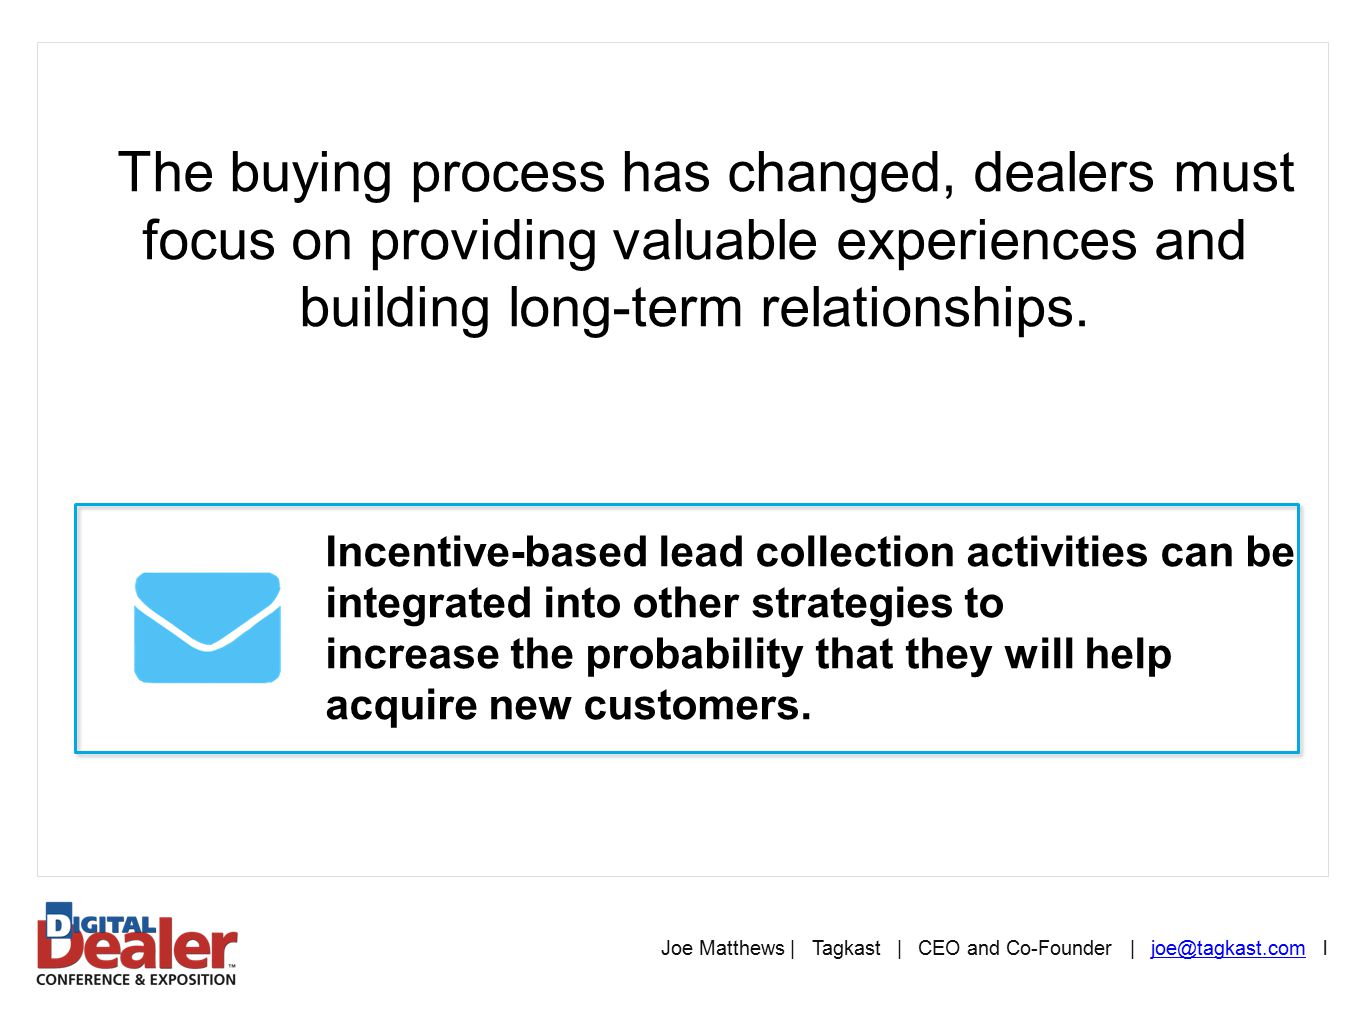 The buying process has changed, dealers must focus on providing valuable experiences and building long-term relationships.